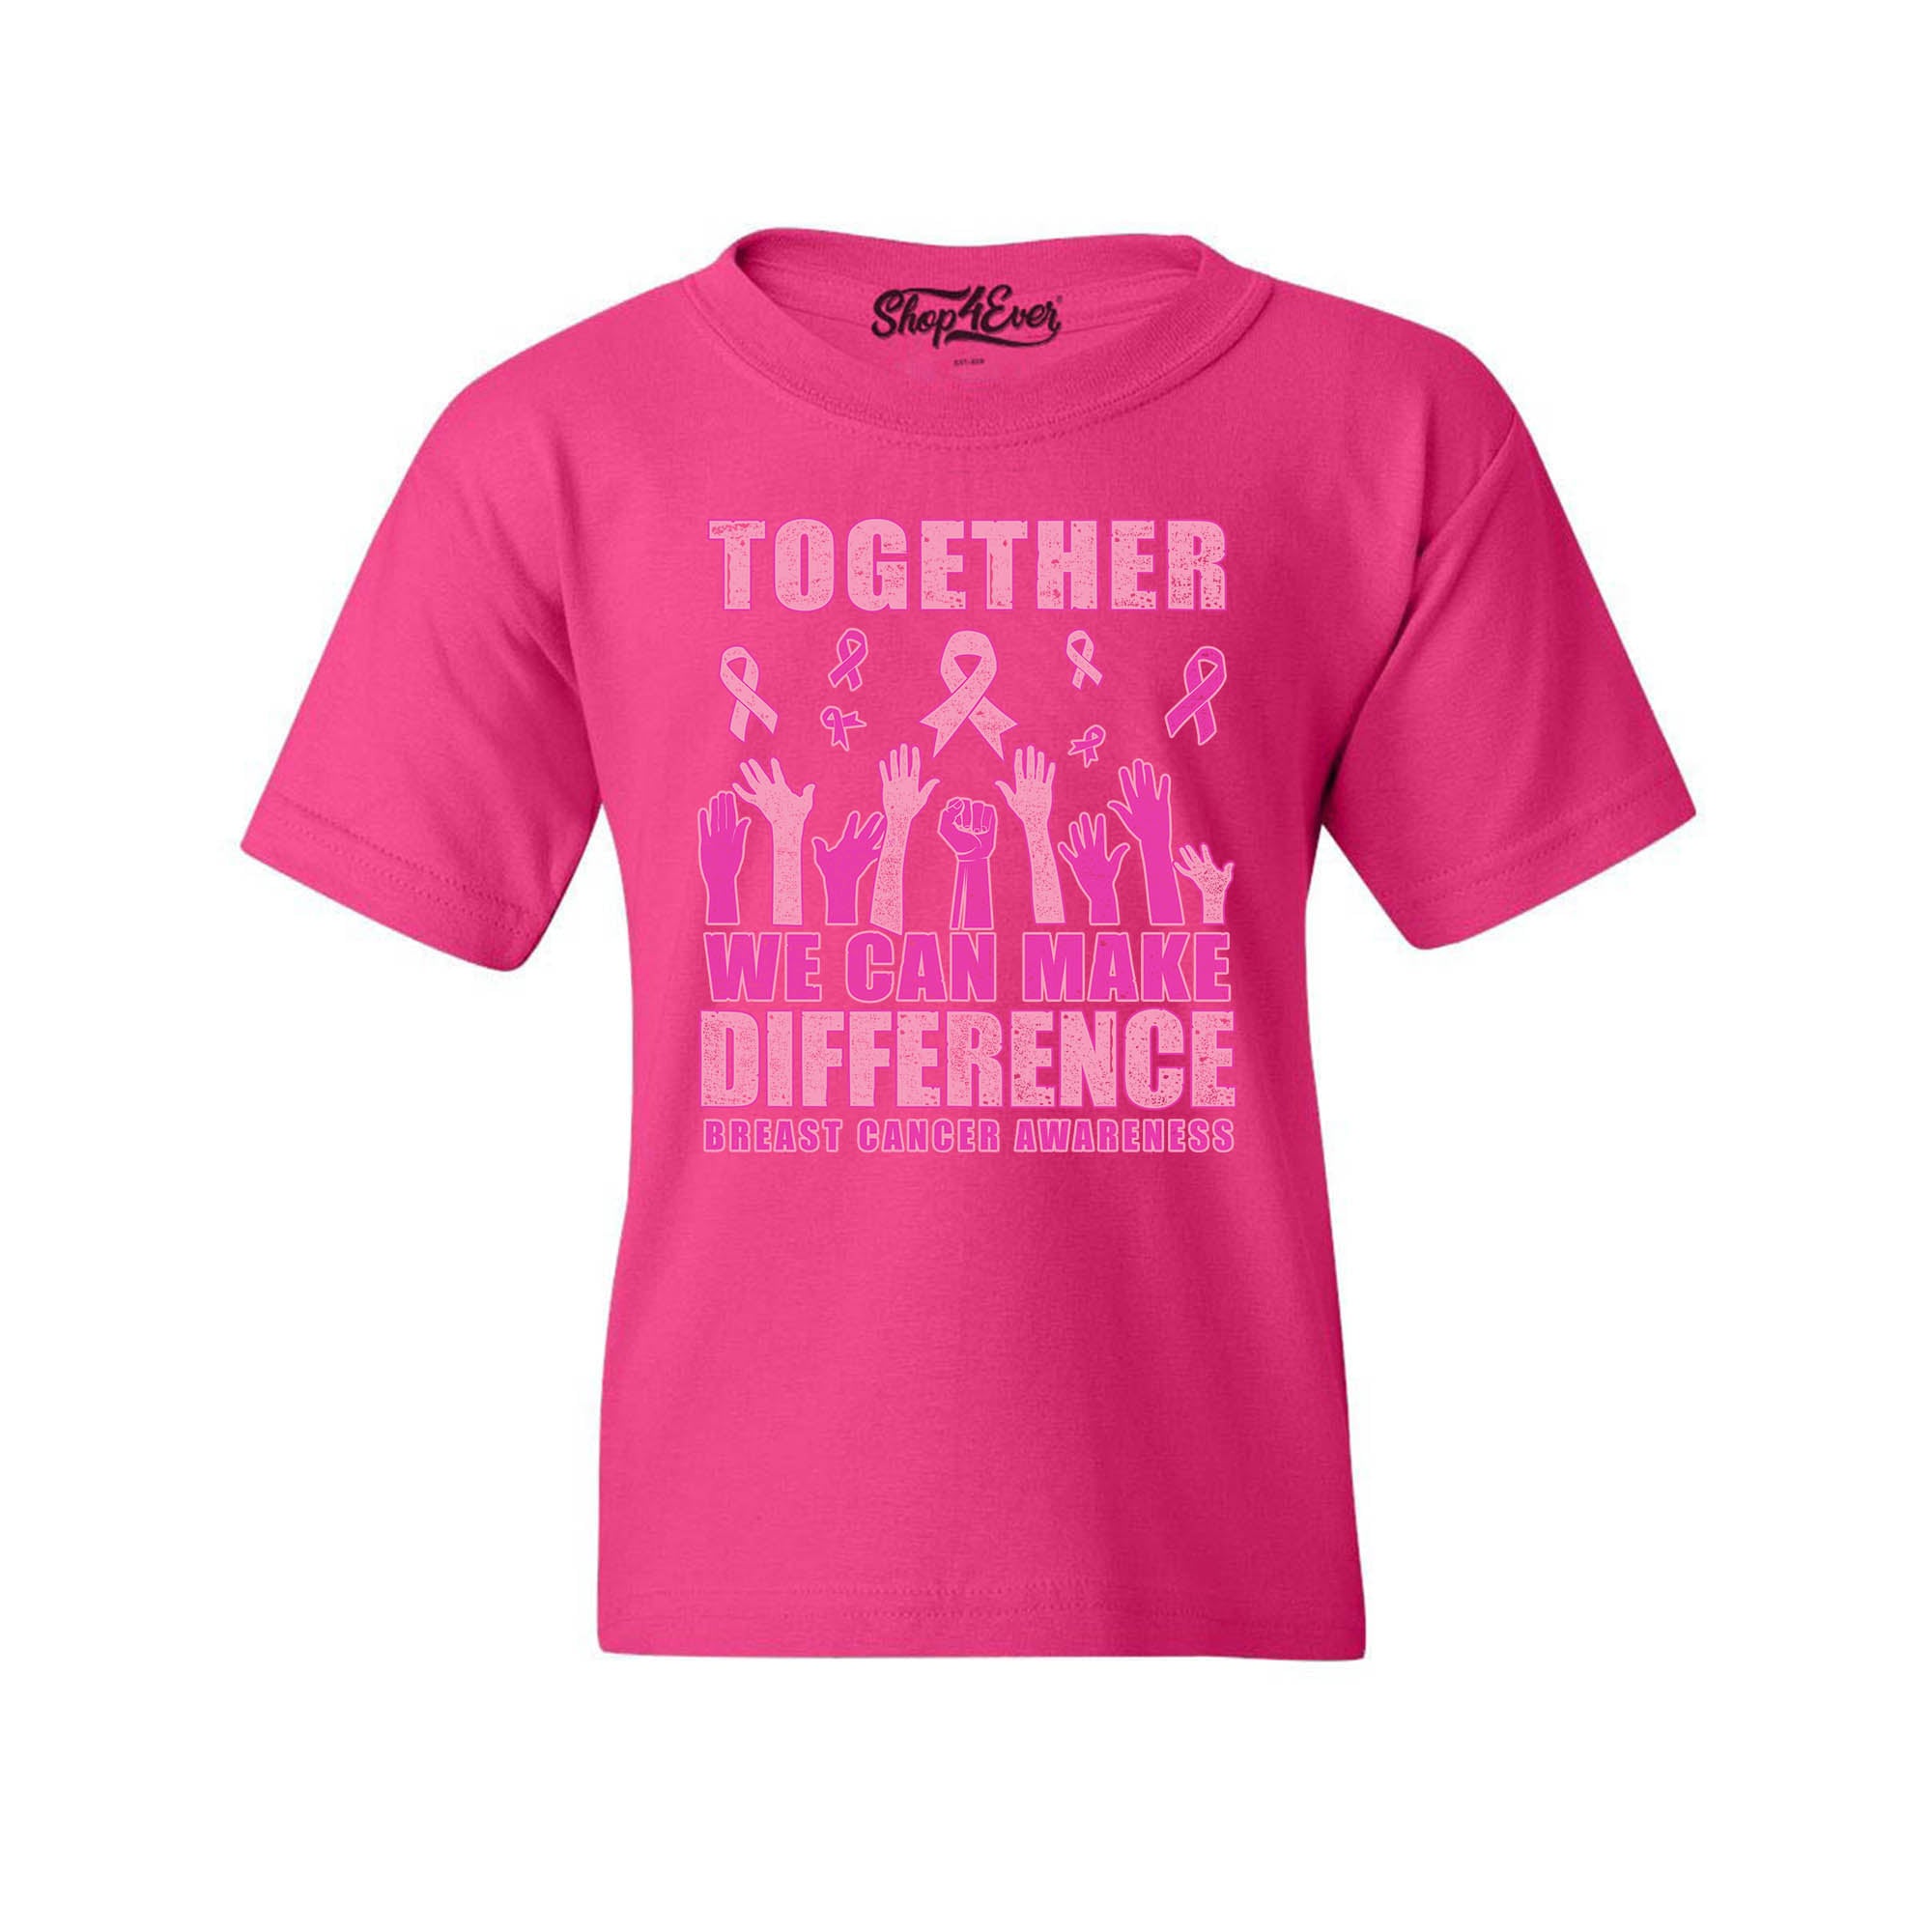 Together We Can Make A Difference Youth's T-Shirt Breast Cancer Awareness Child's Tee